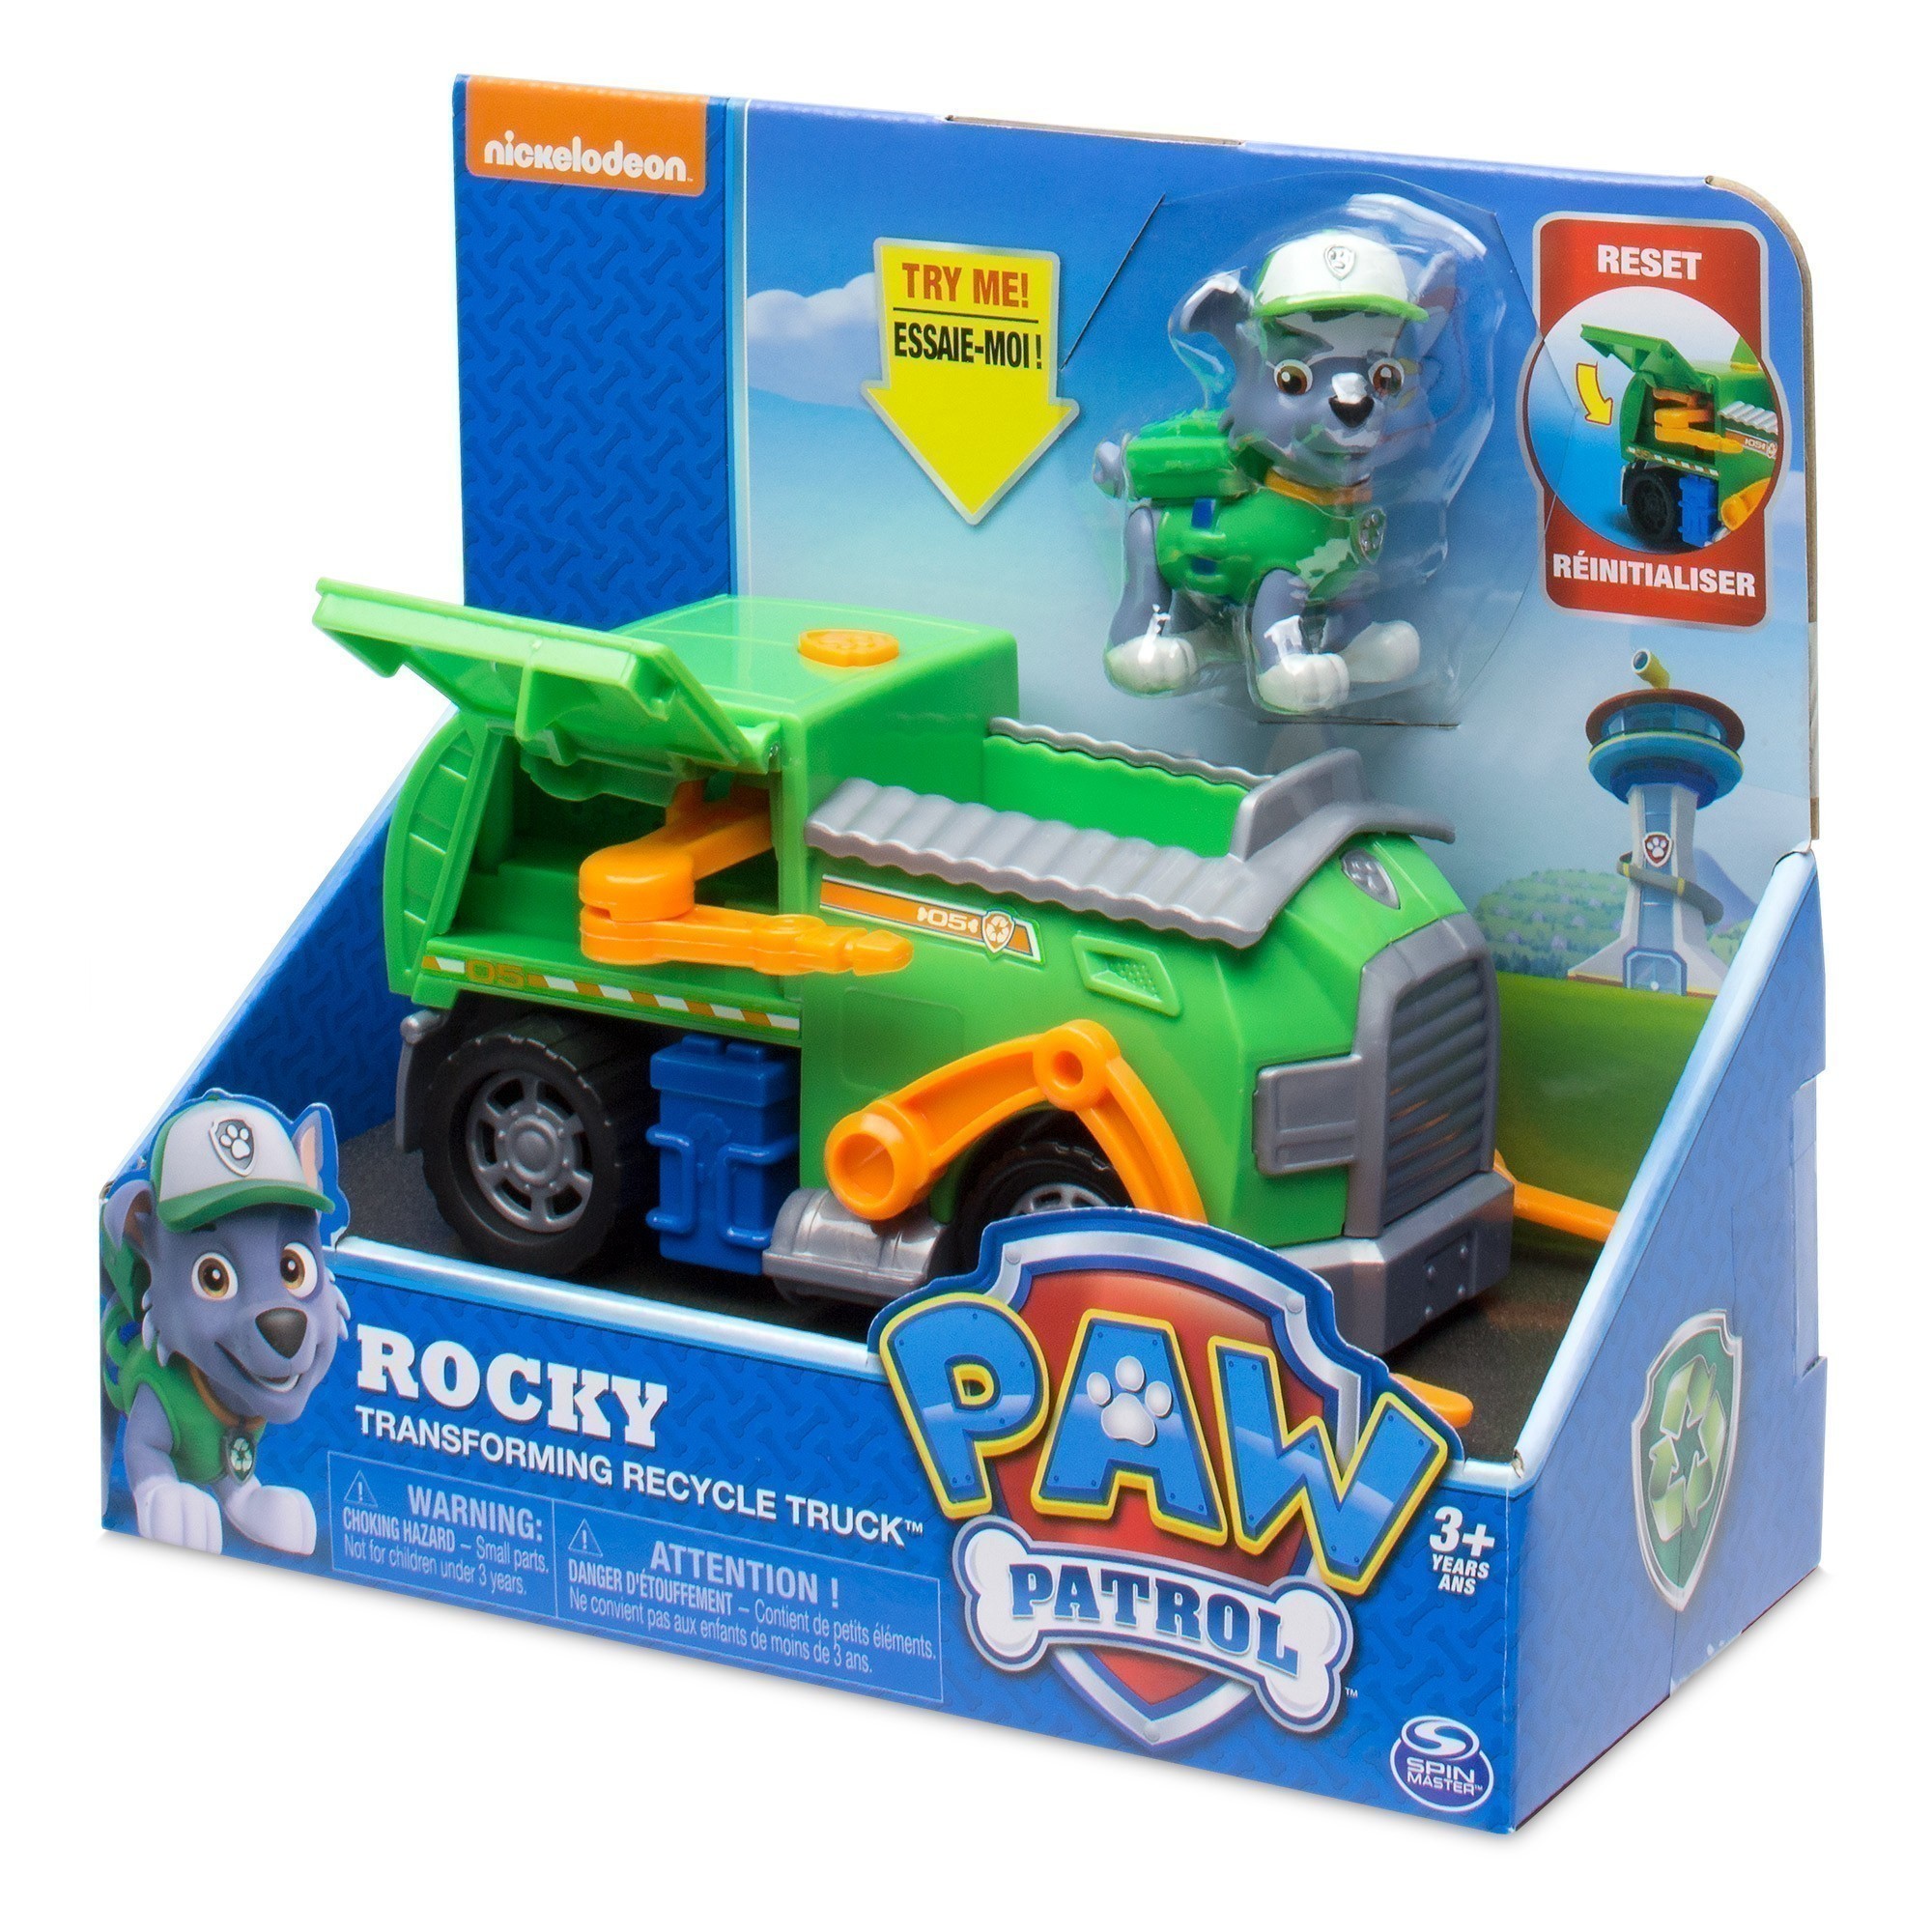 Nickelodeon - Paw Patrol - Rocky Transforming Recycle Truck